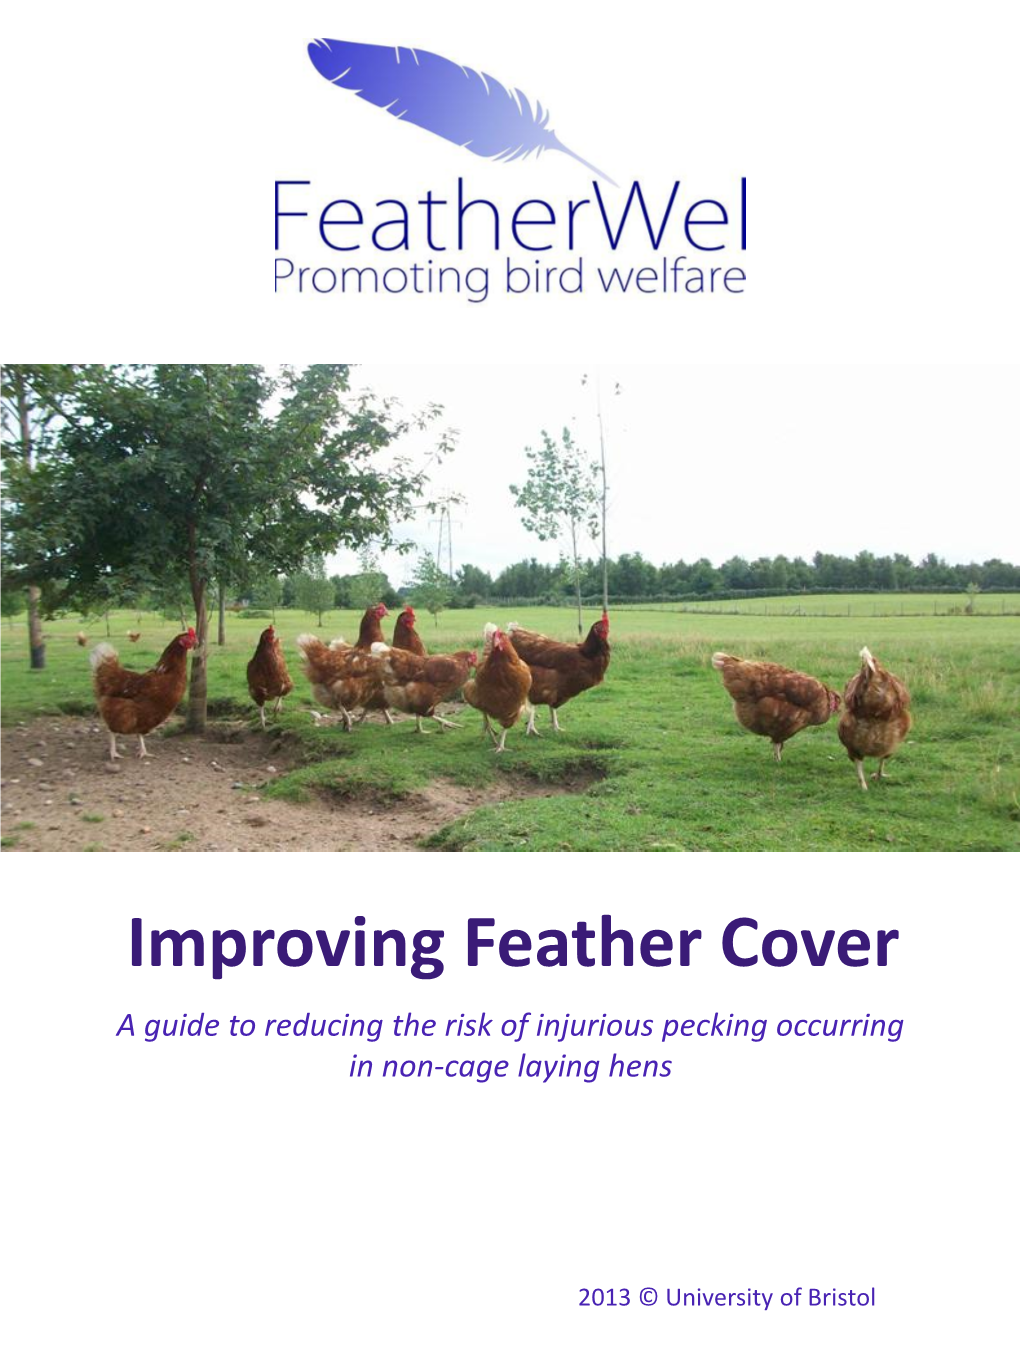 Improving Feather Cover a Guide to Reducing the Risk of Injurious Pecking Occurring in Non-Cage Laying Hens